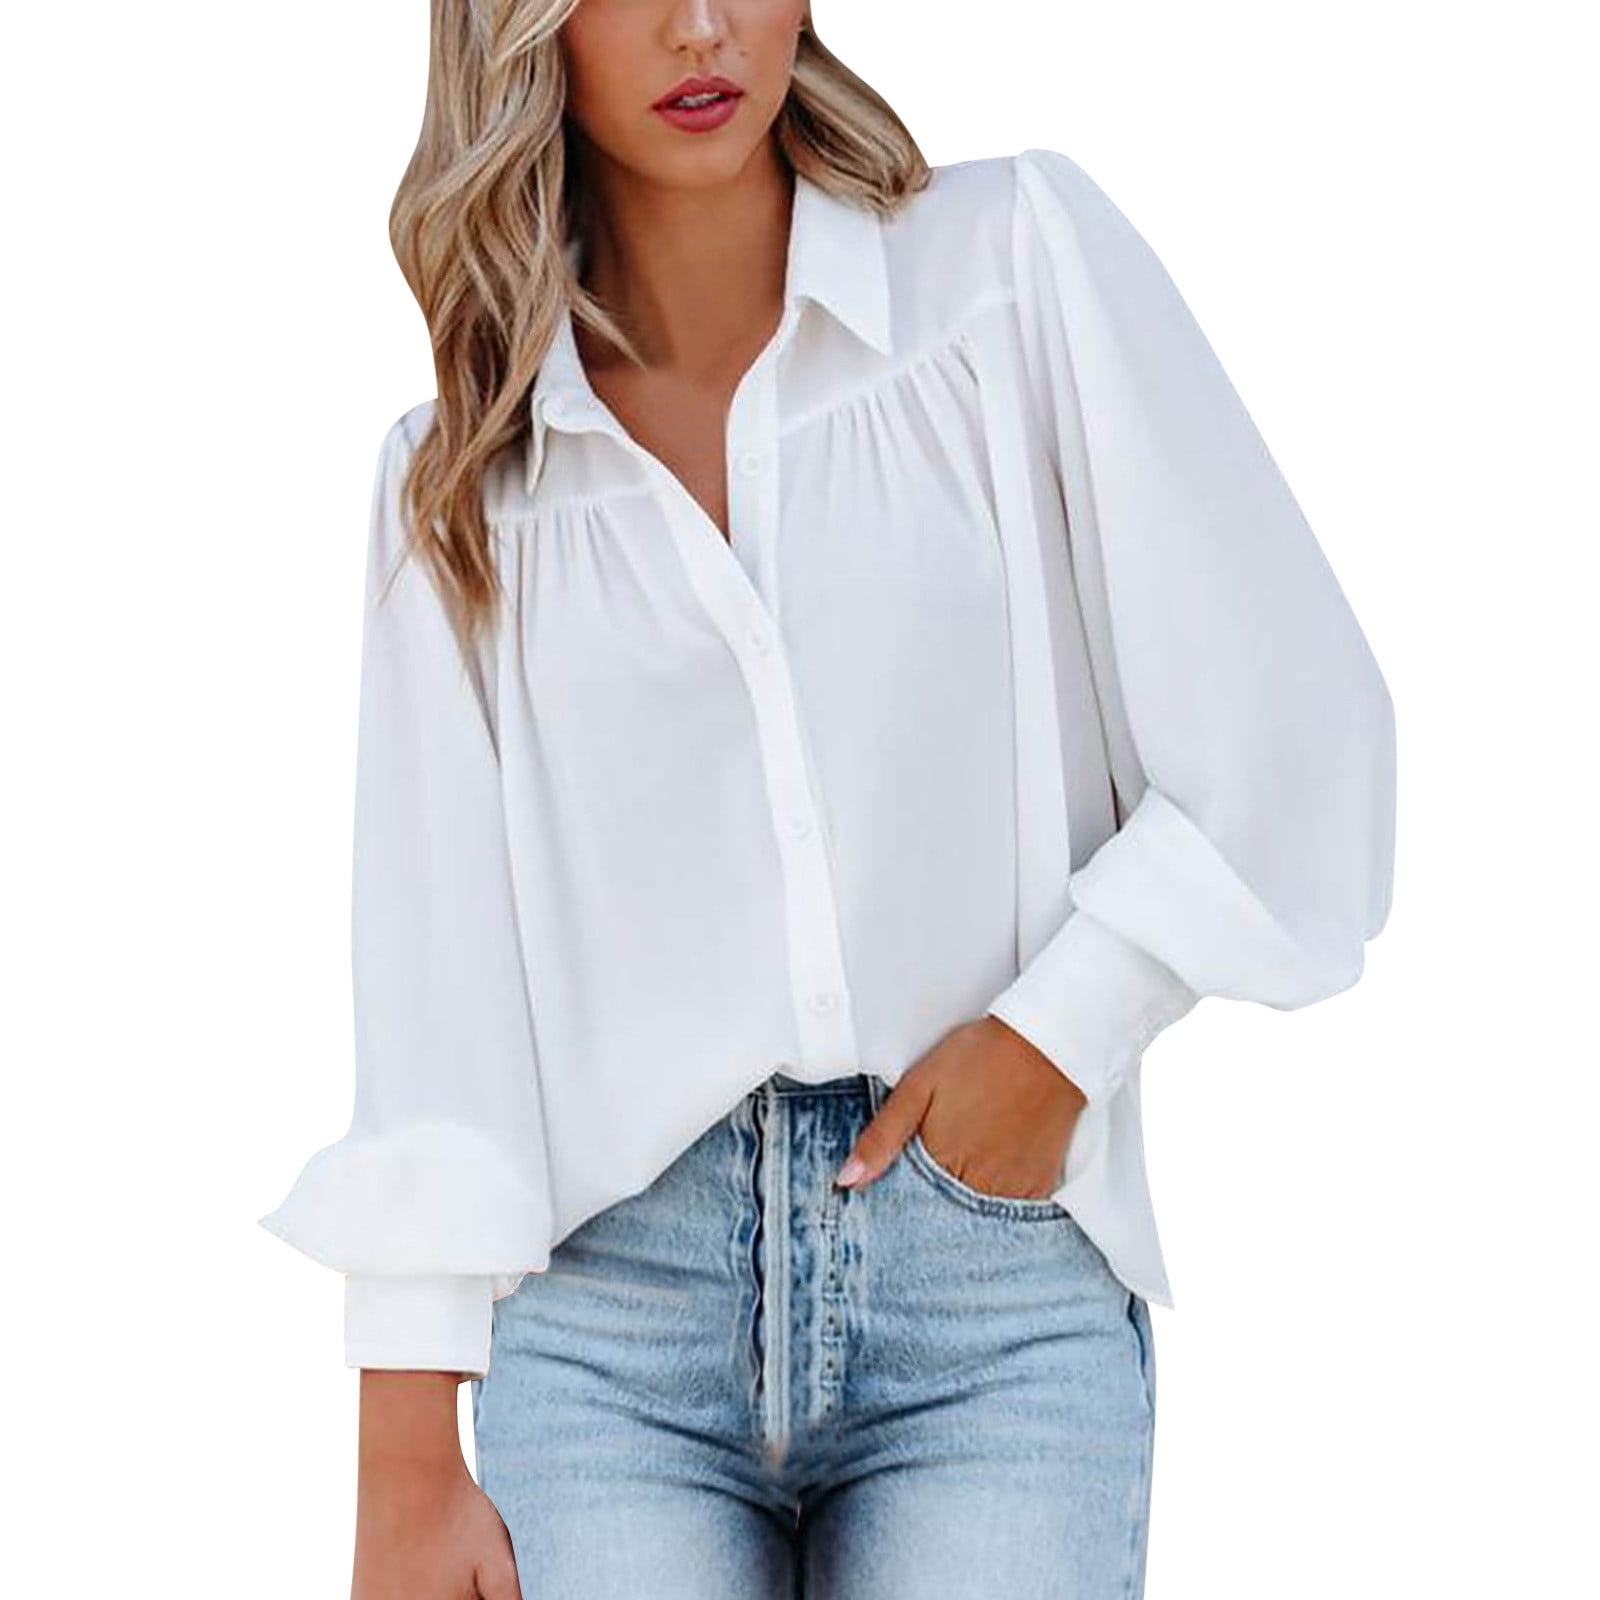 White Summer Lovely Sweet Casual Loose T-Shirt Women Tops S1301